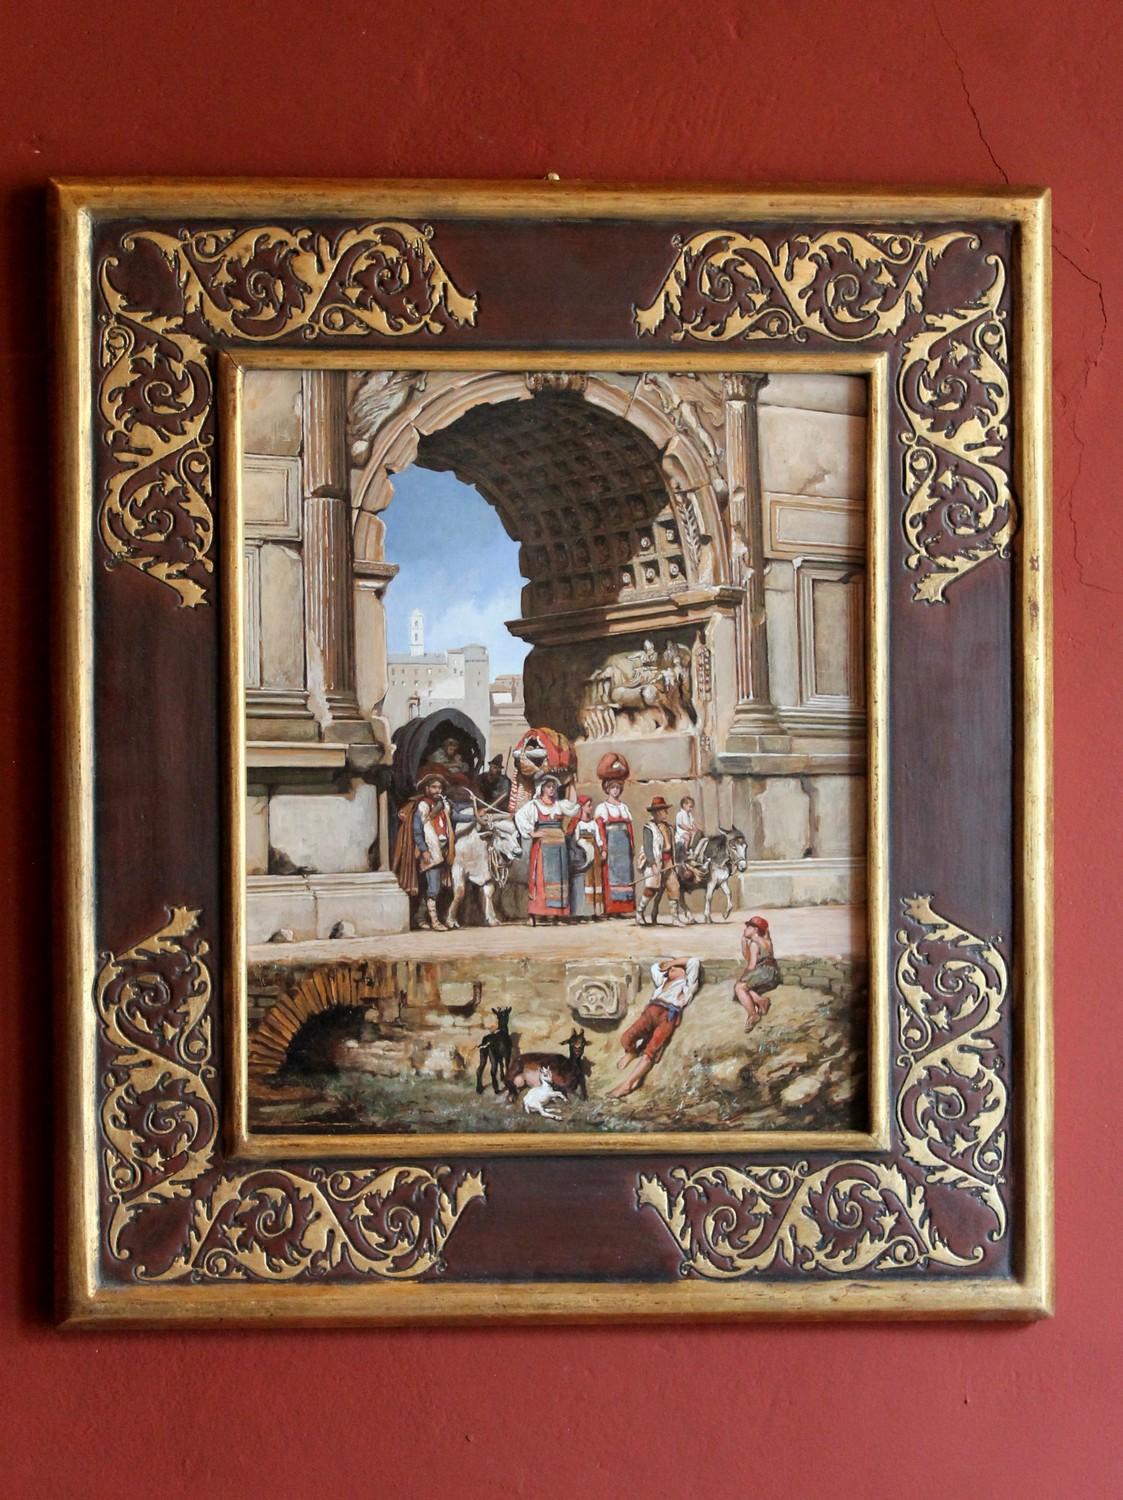 This fascinating turn of the century oil on wood panel painting, depicting a view of one of the most evocative Roman ruins, contains stories from different artistic eras.
The pride of Italian realism is represented in the group of villagers who,